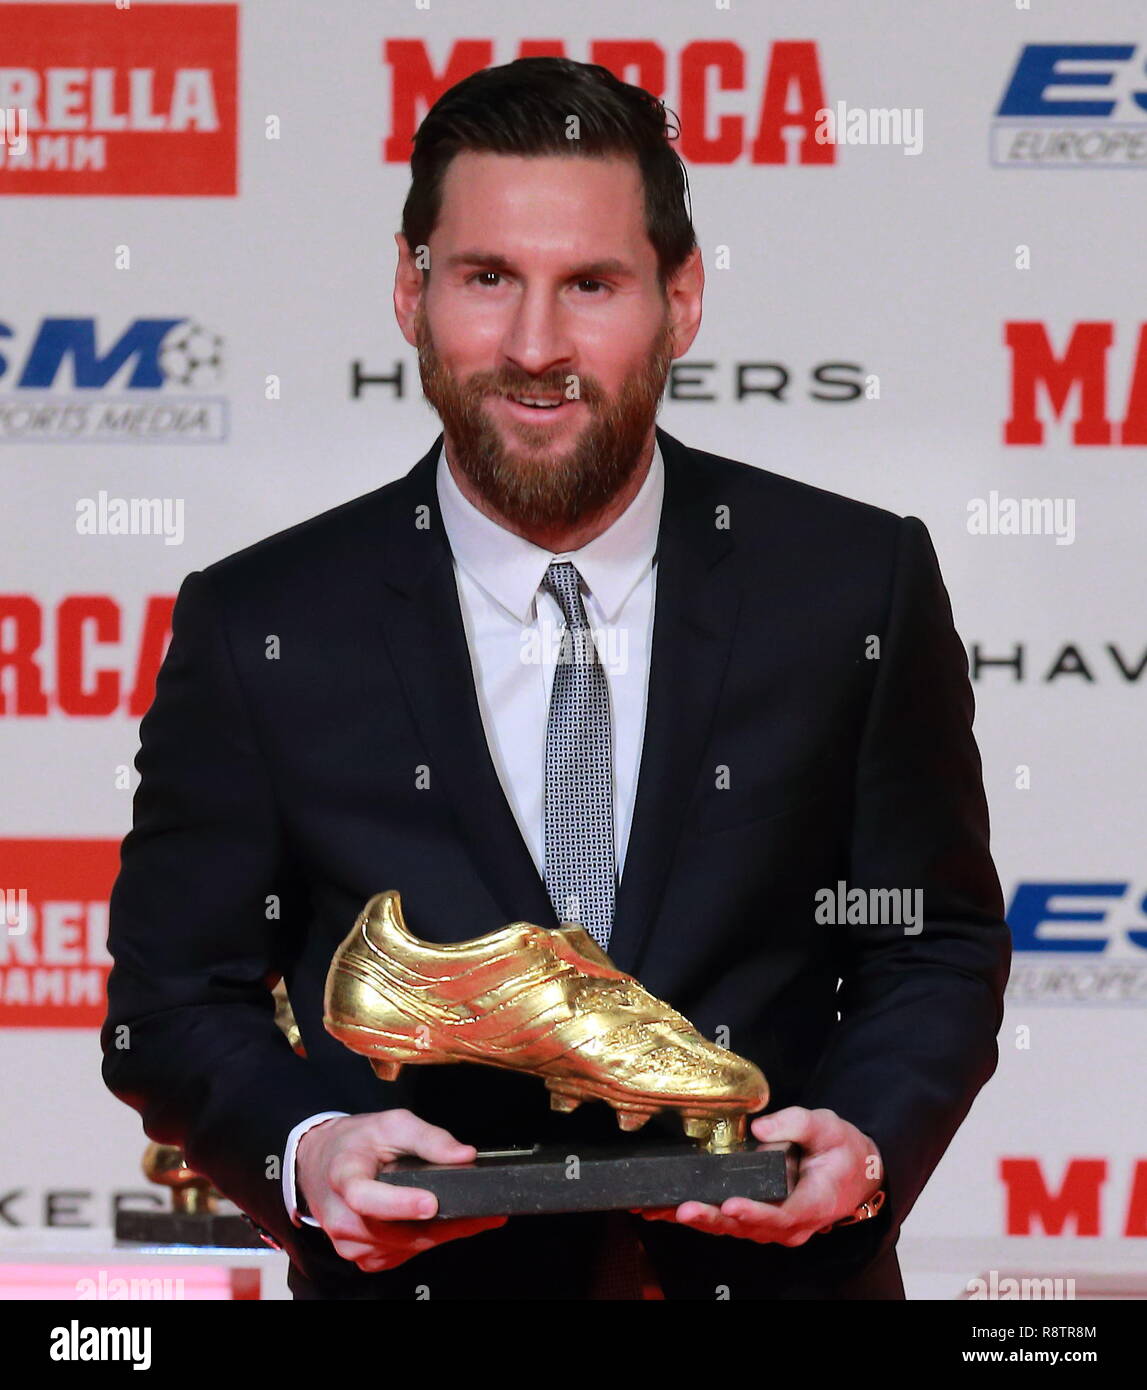 Barcelona, Spain. 18th December, 2018. Lionel Messi receives his fifth  golden boot for 2017-2018 season.